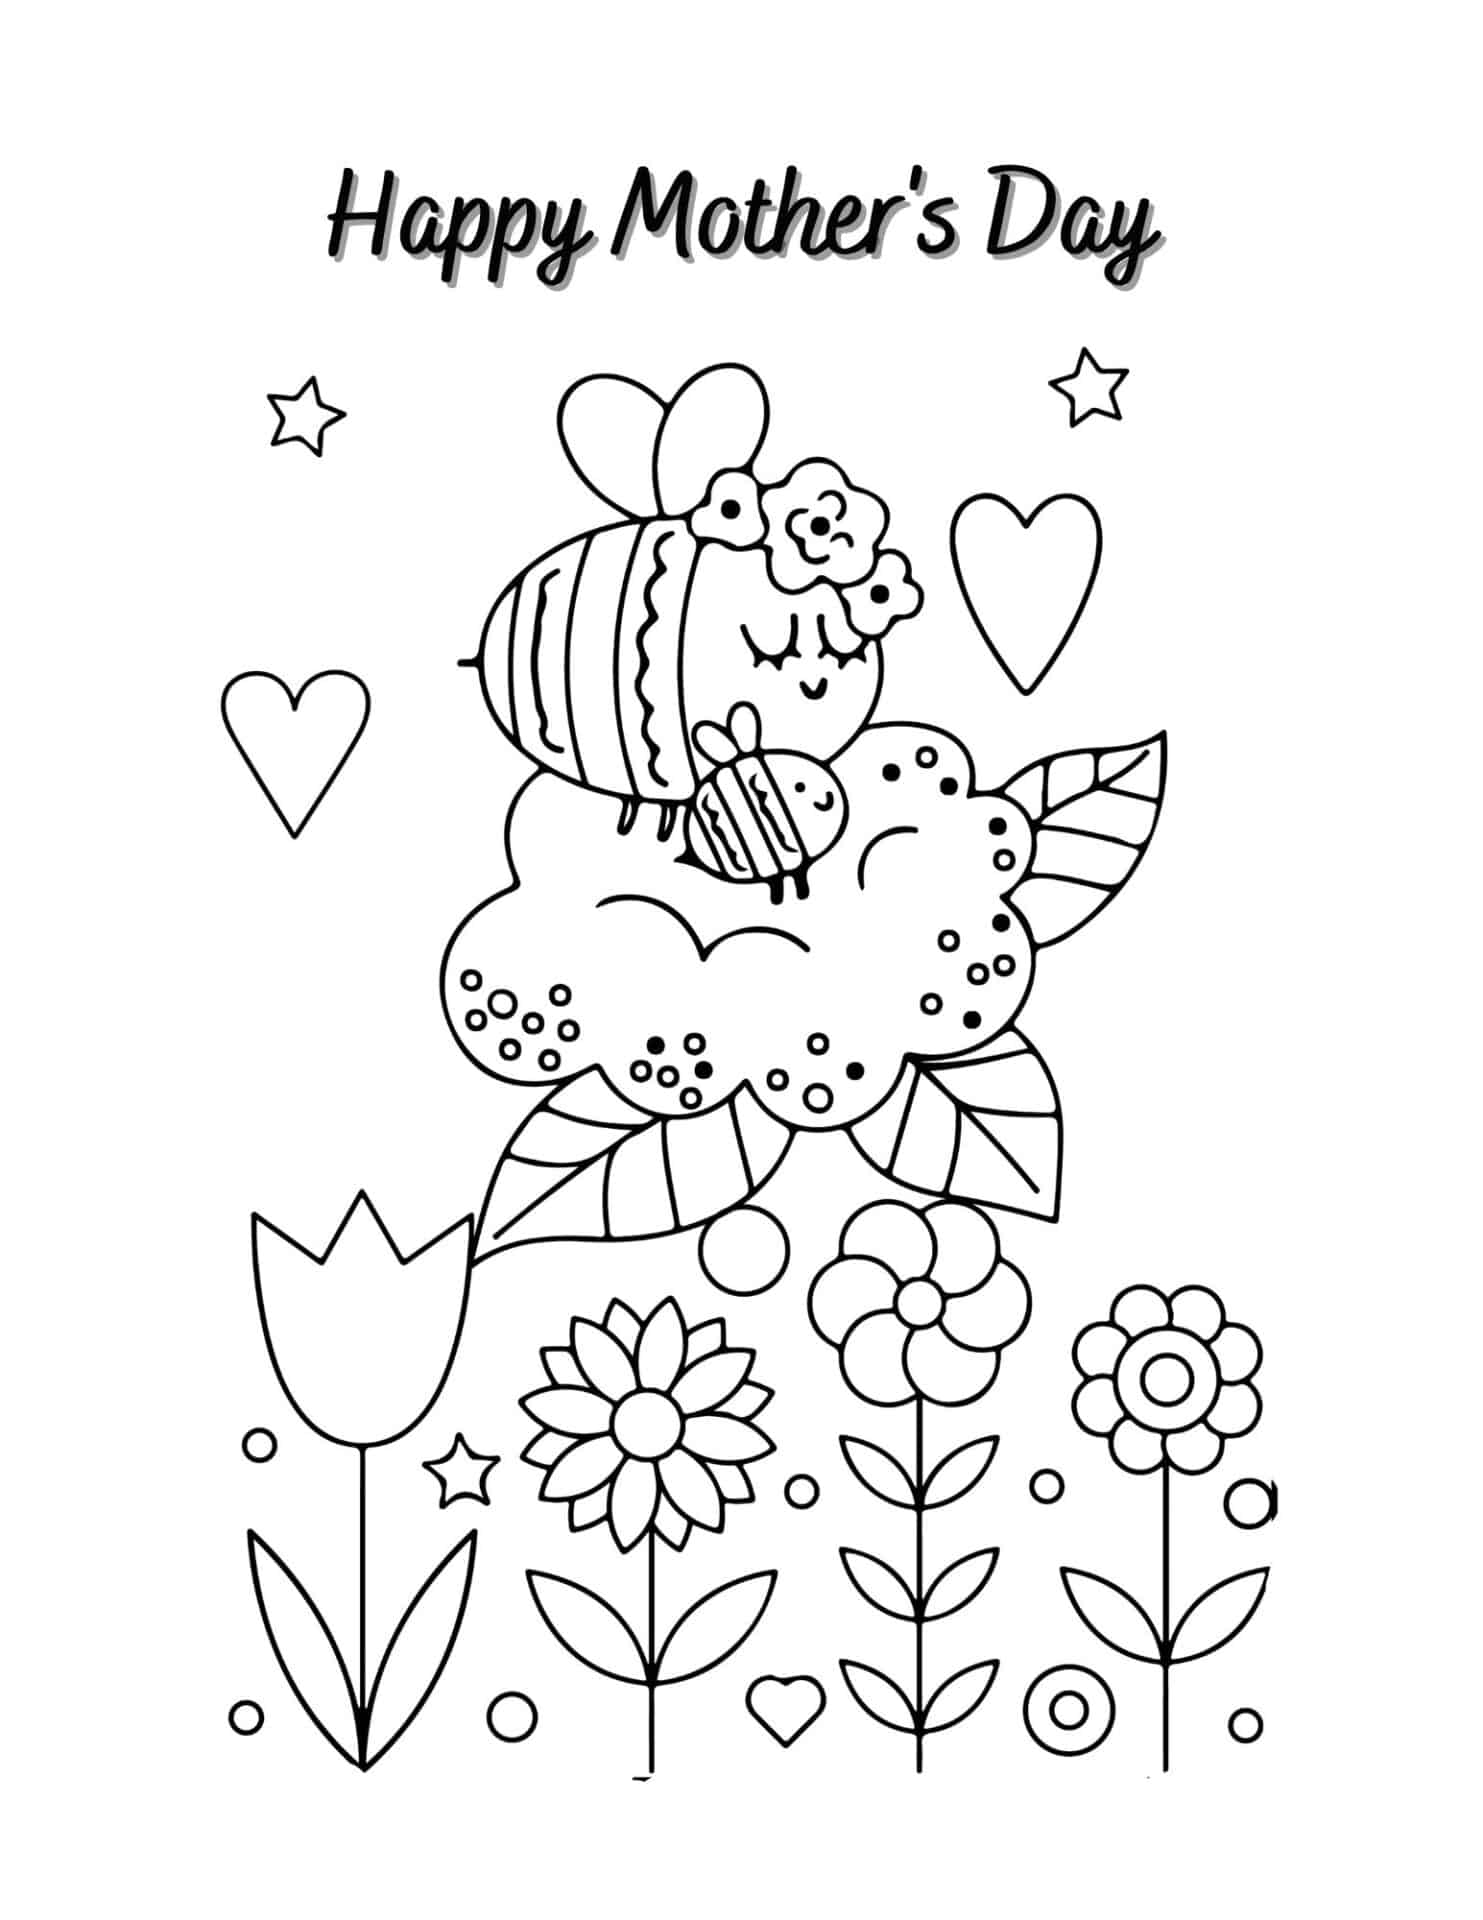 6 Mother's Day Coloring Pages | Free | Printable